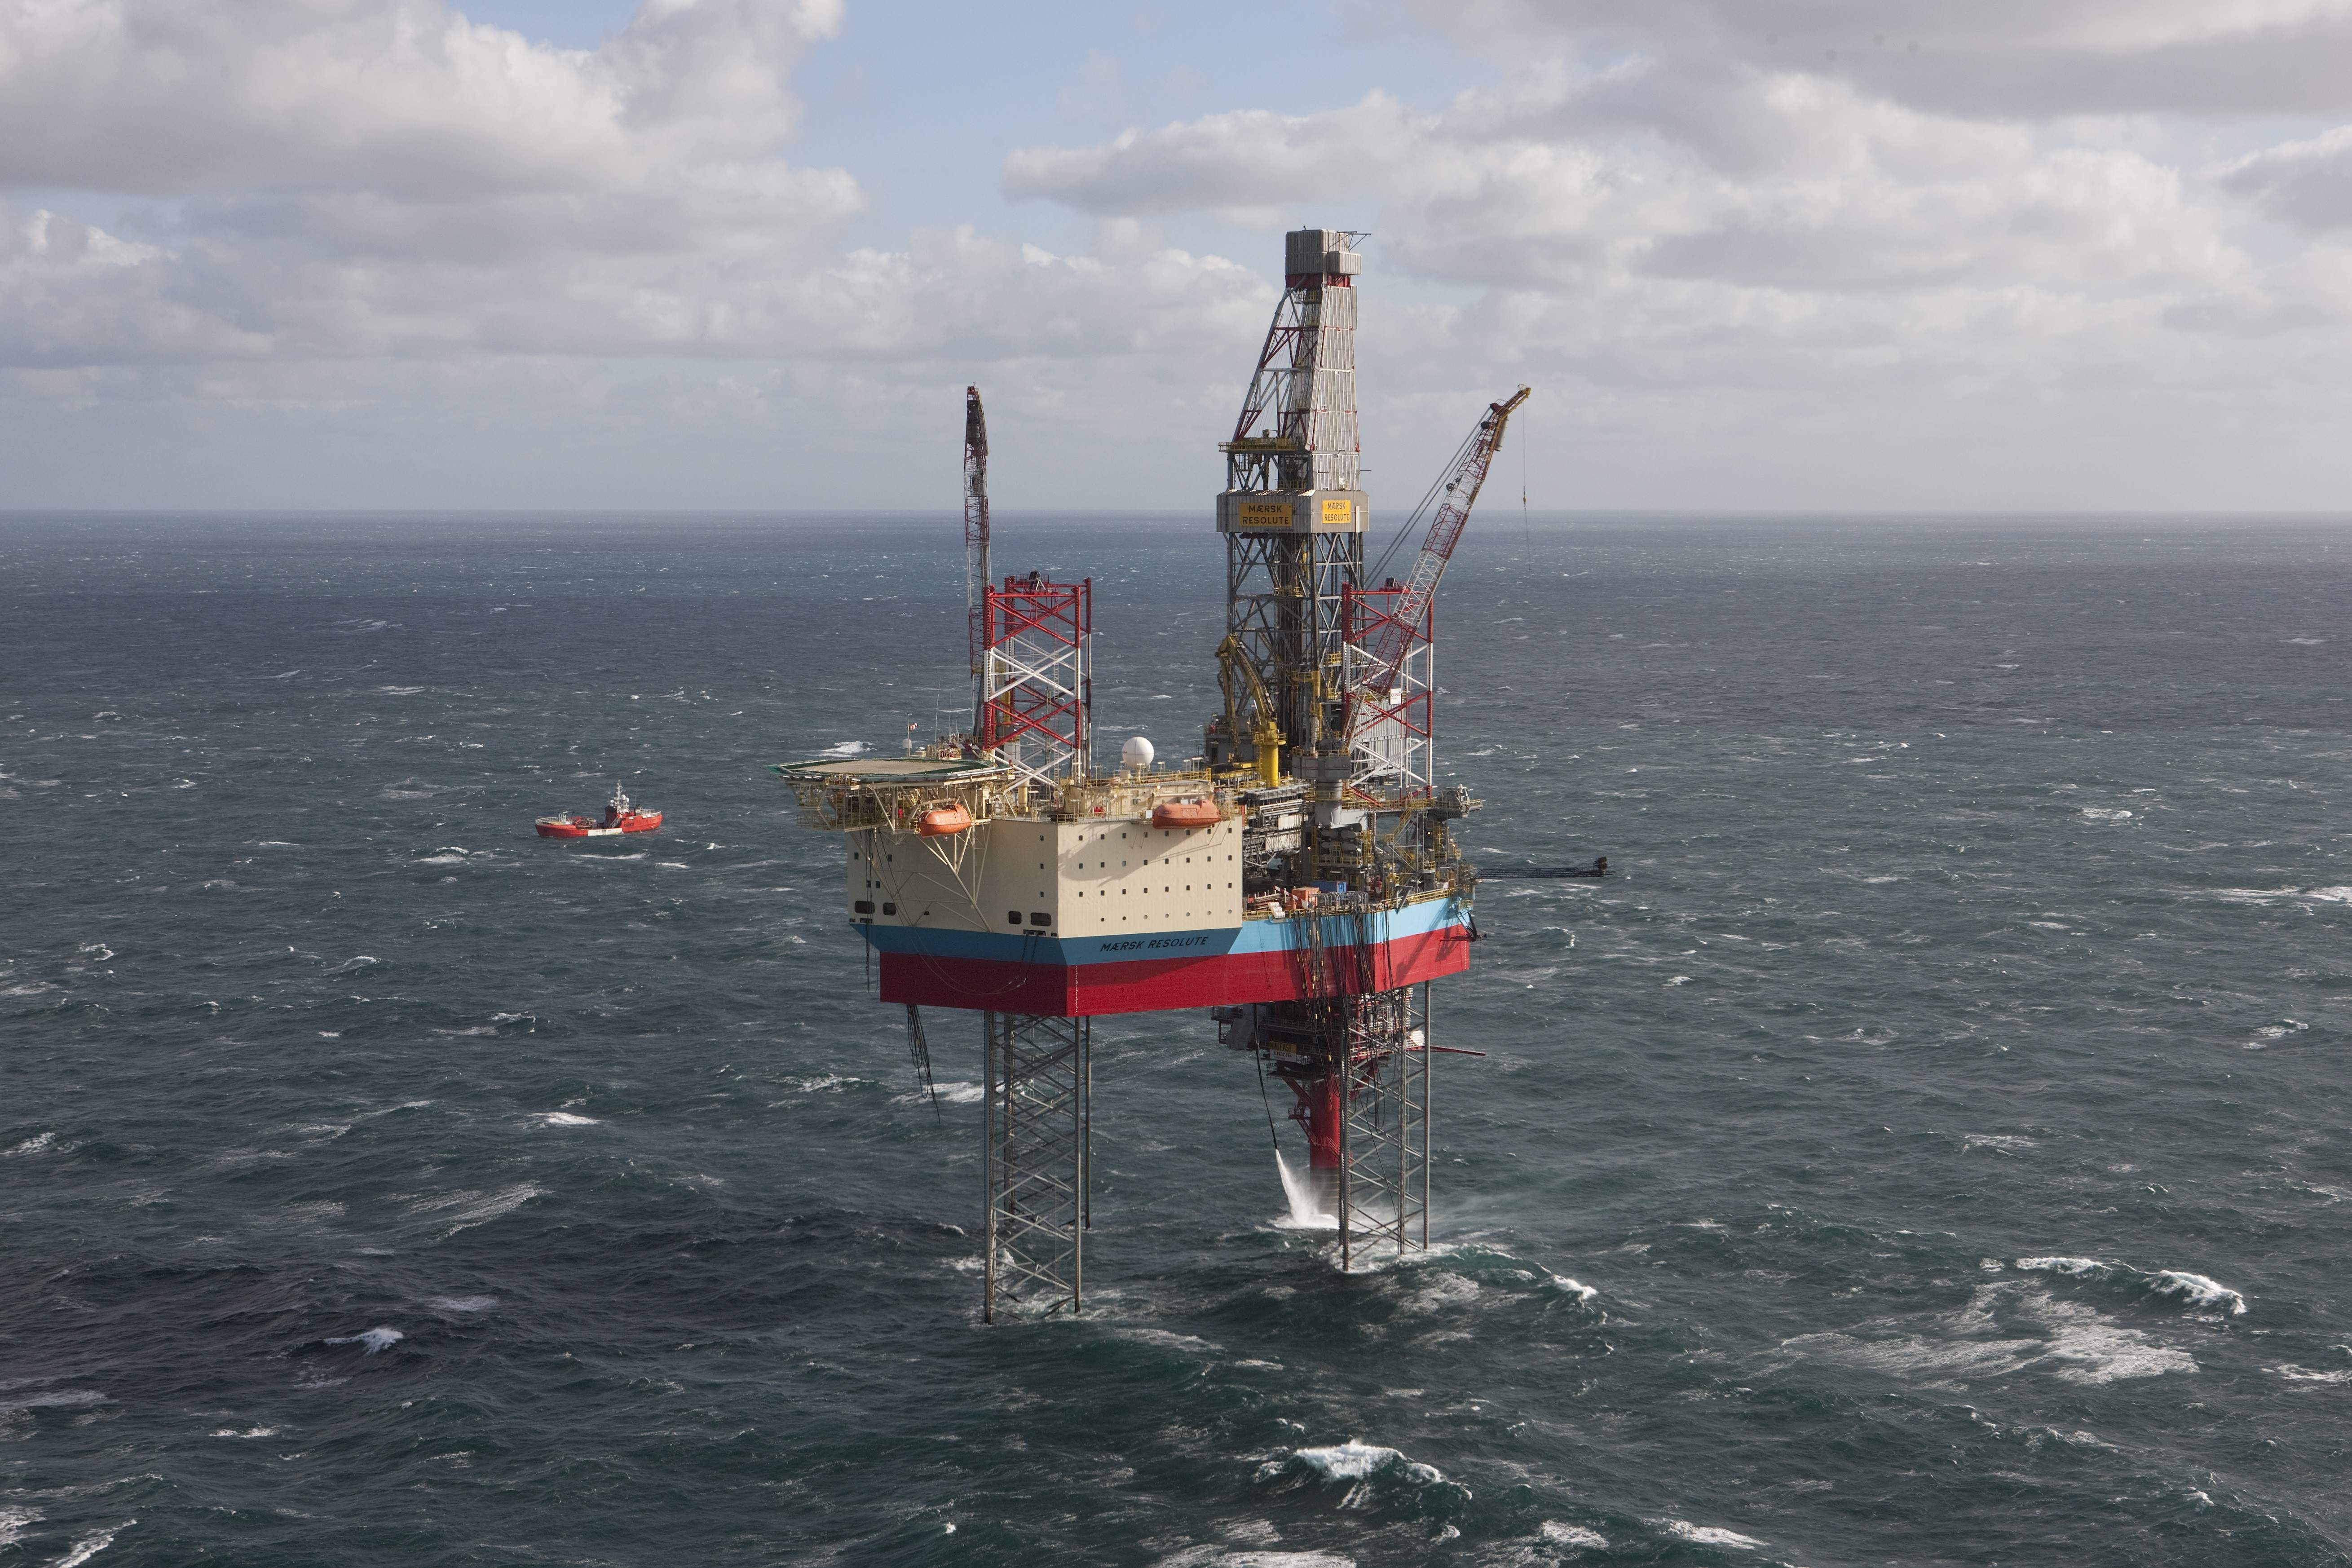 Maersk Drilling bags contract extensions for two jack-up rigs in North Sea